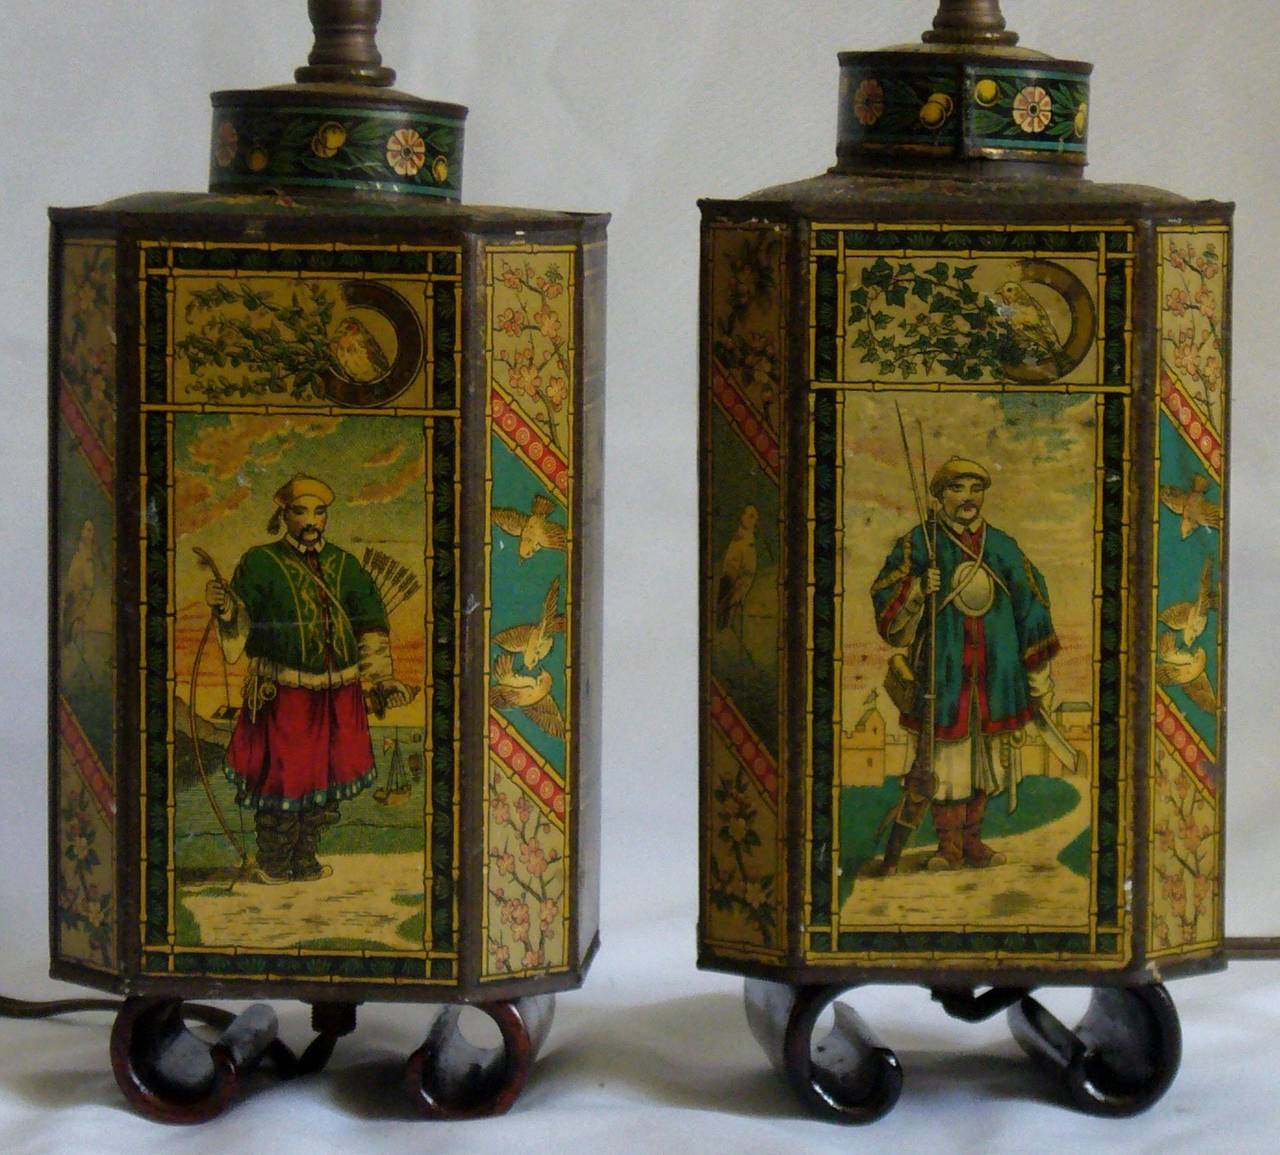 Pair of continental chinoiserie tea tin lamps with custom oriental wood base and light blue coral finials. Europe, mid-1800s .
Dimension: 4.5